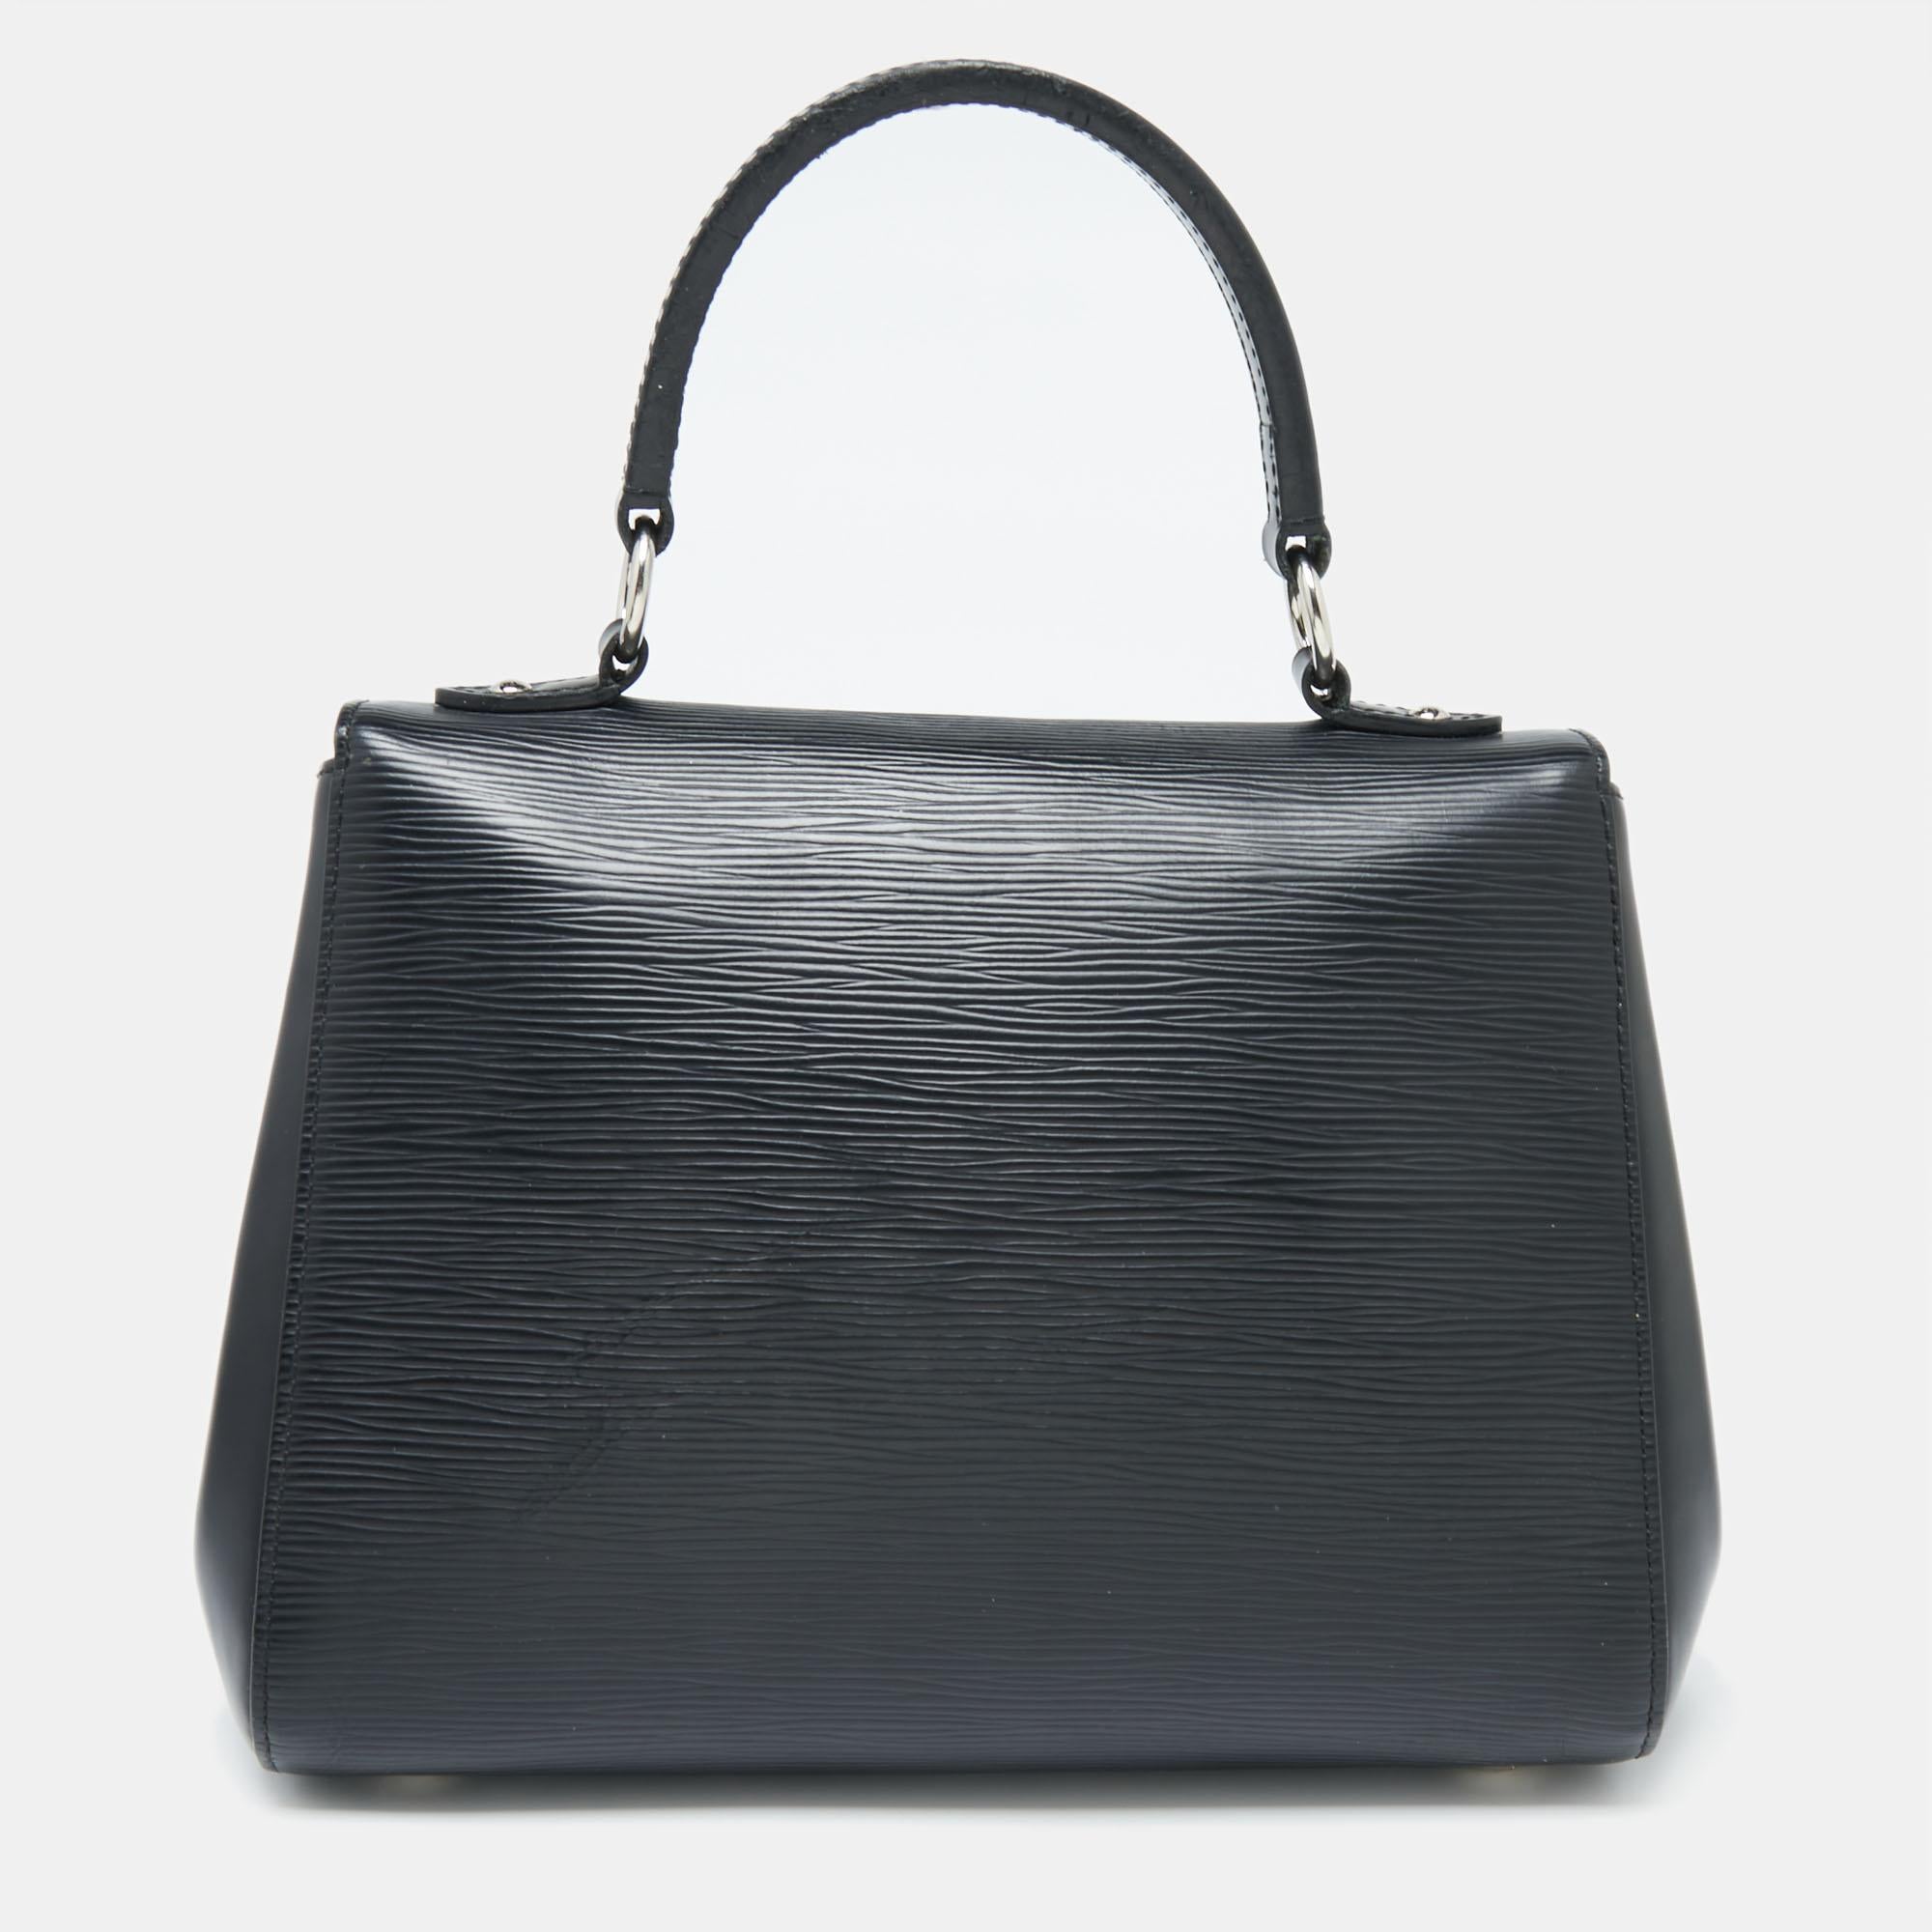 Each bag that comes out of Louis Vuitton's workshops is high on style and craftsmanship, including this beauty. Created from Epi leather, the Cluny bag has a fine finish. The bag features a top handle, a detachable shoulder strap, protective feet at